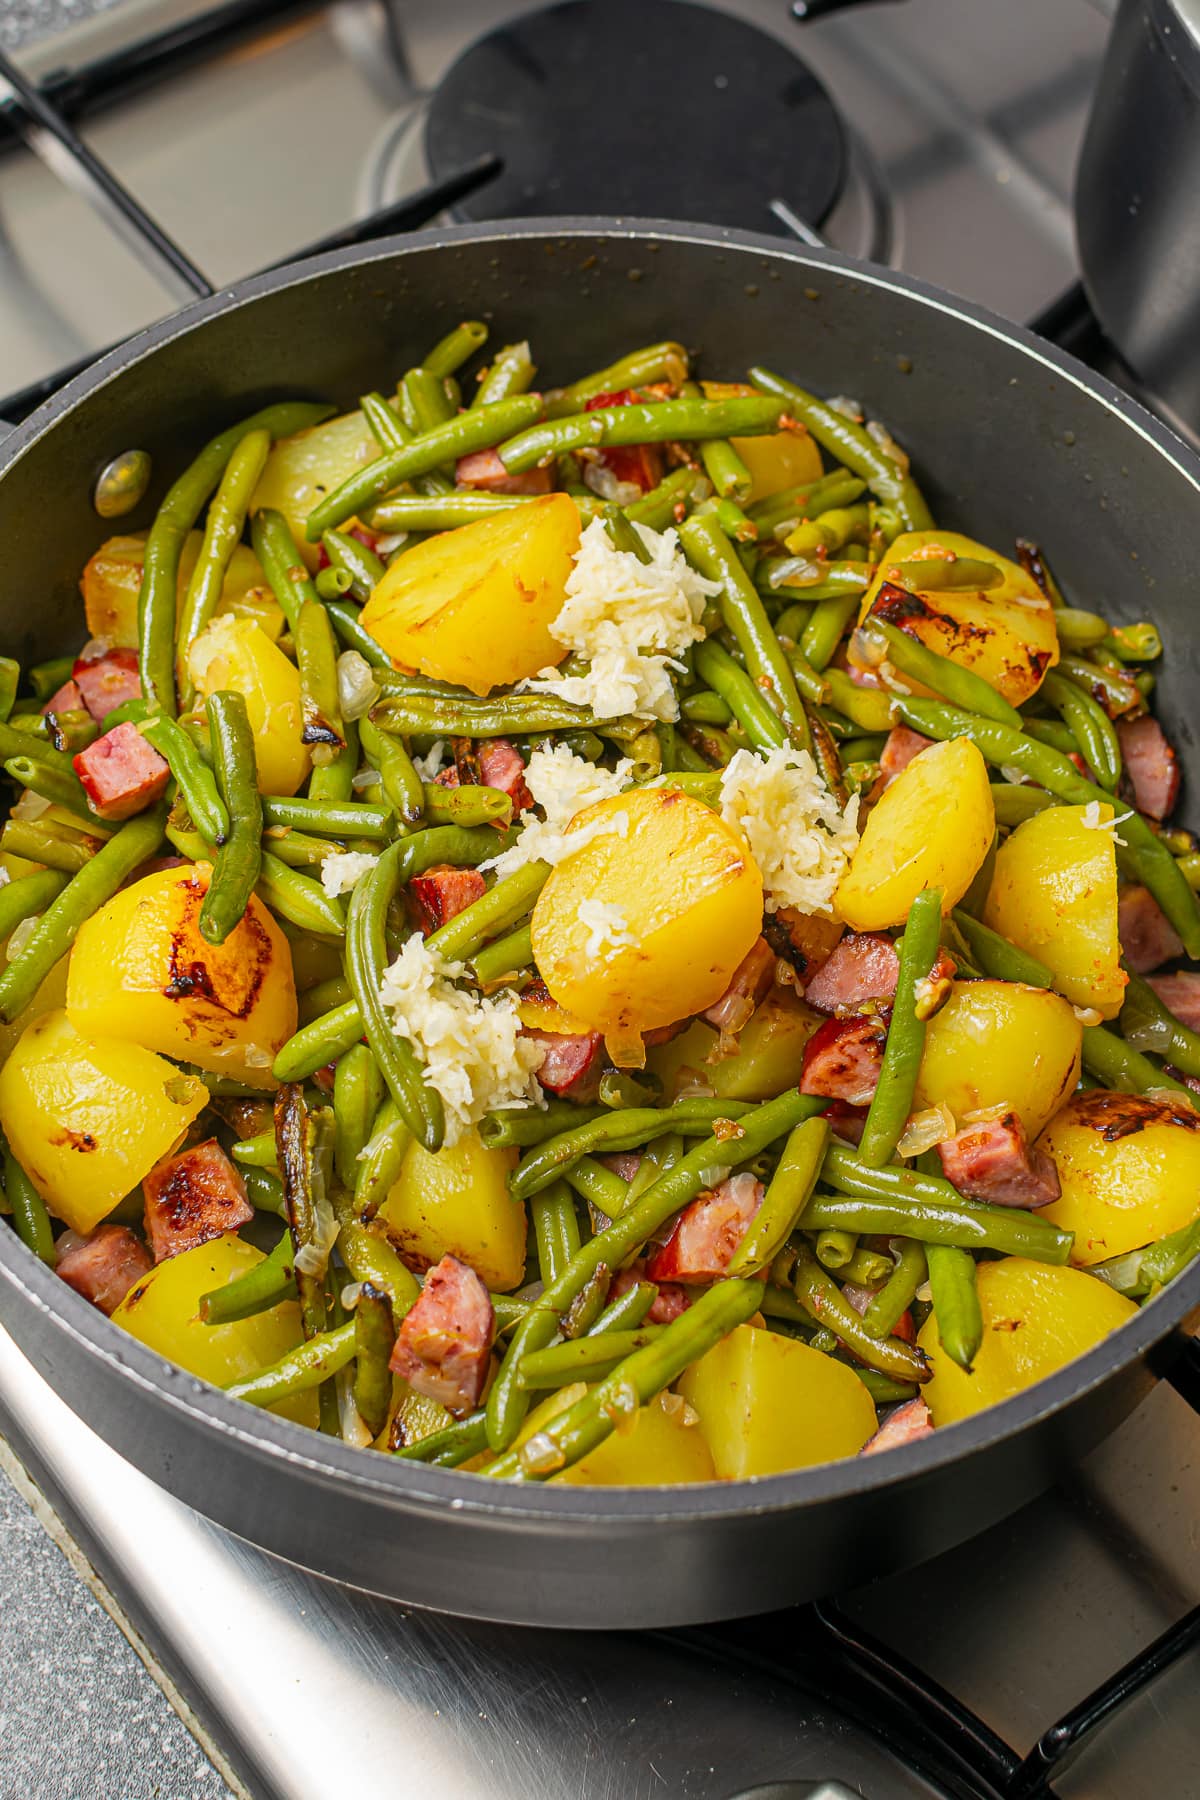 The cooked dish of green beans, potatoes, and kielbasa in a skillet, ready to be served.